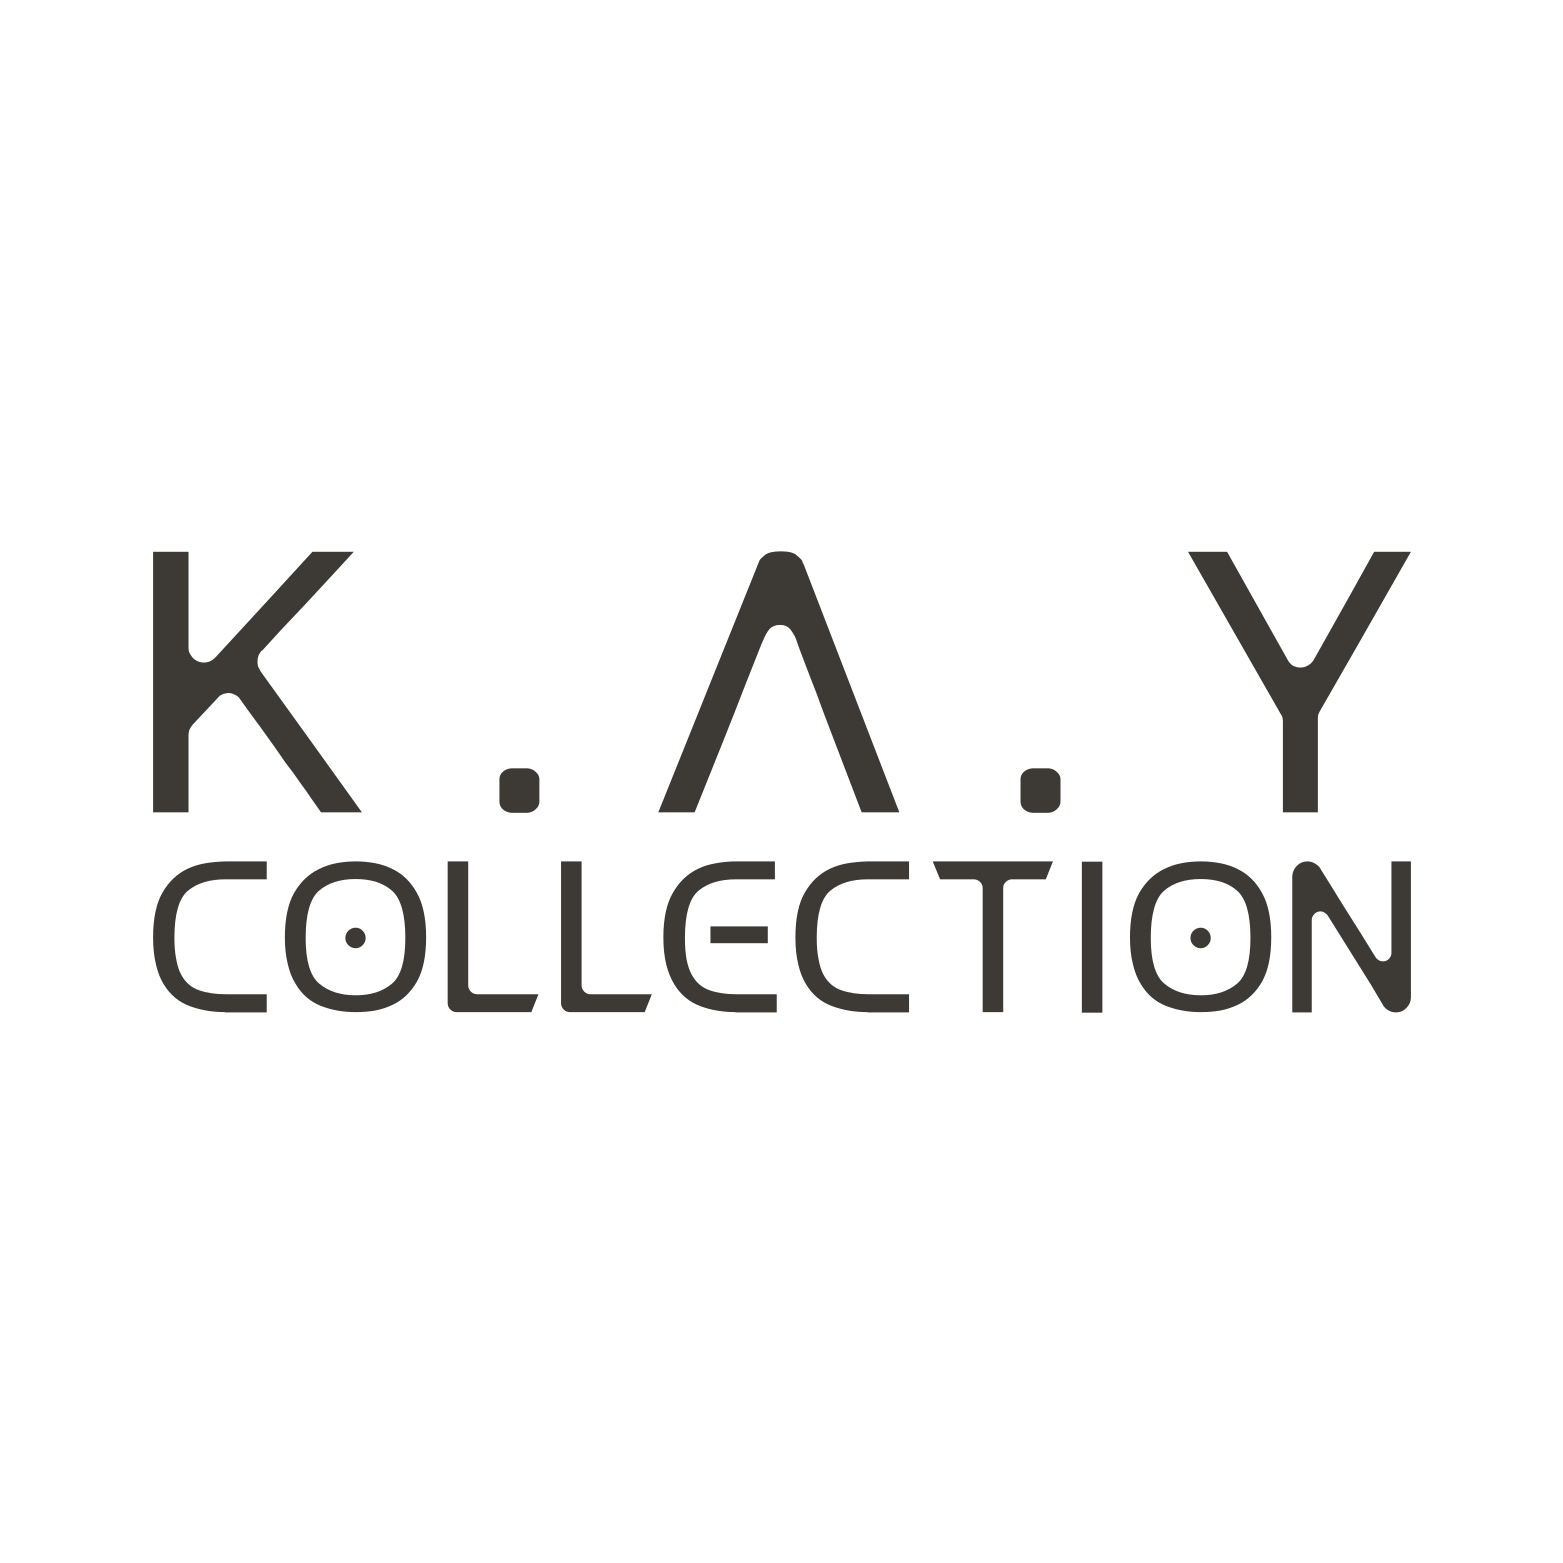 Kay collection 